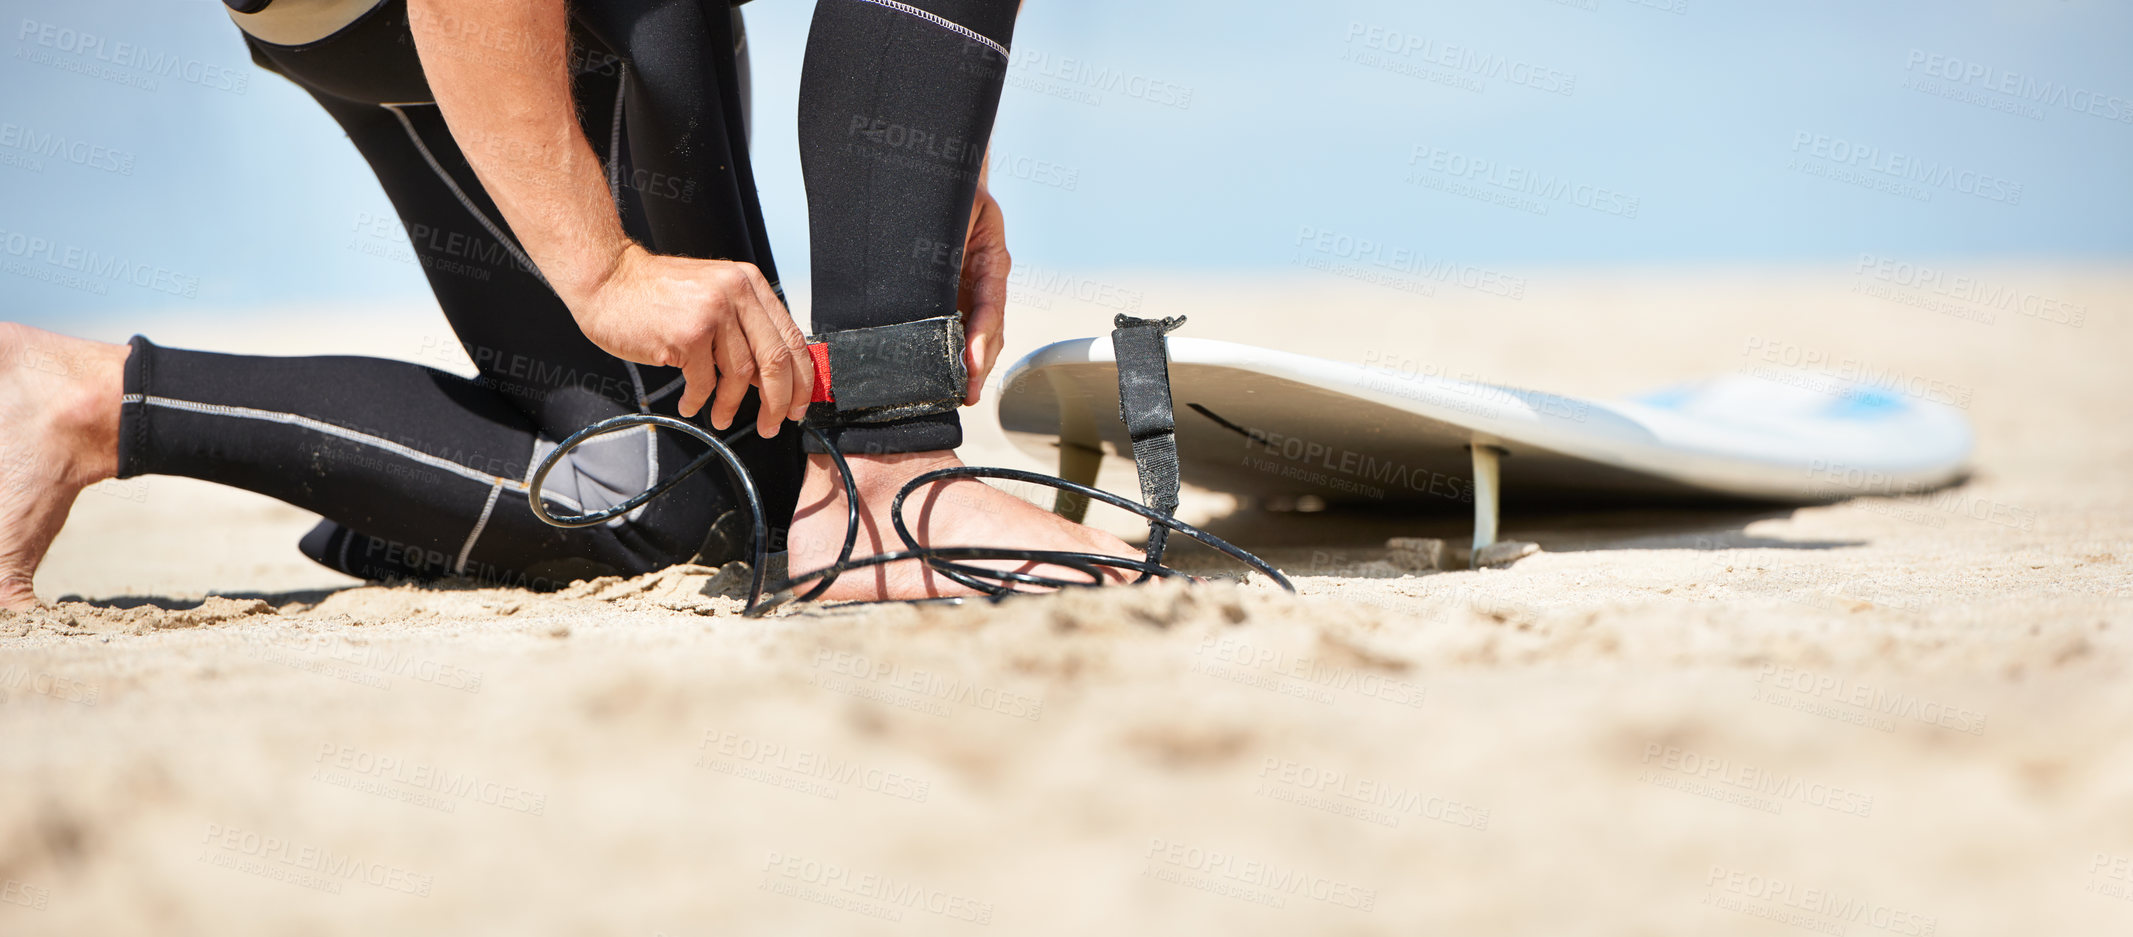 Buy stock photo Legs, strap for safety and surfer on beach for sports, fitness and training on travel vacation in summer. Hands, ankle and surfboard with person on sand by ocean or sea for surfing hobby or holiday